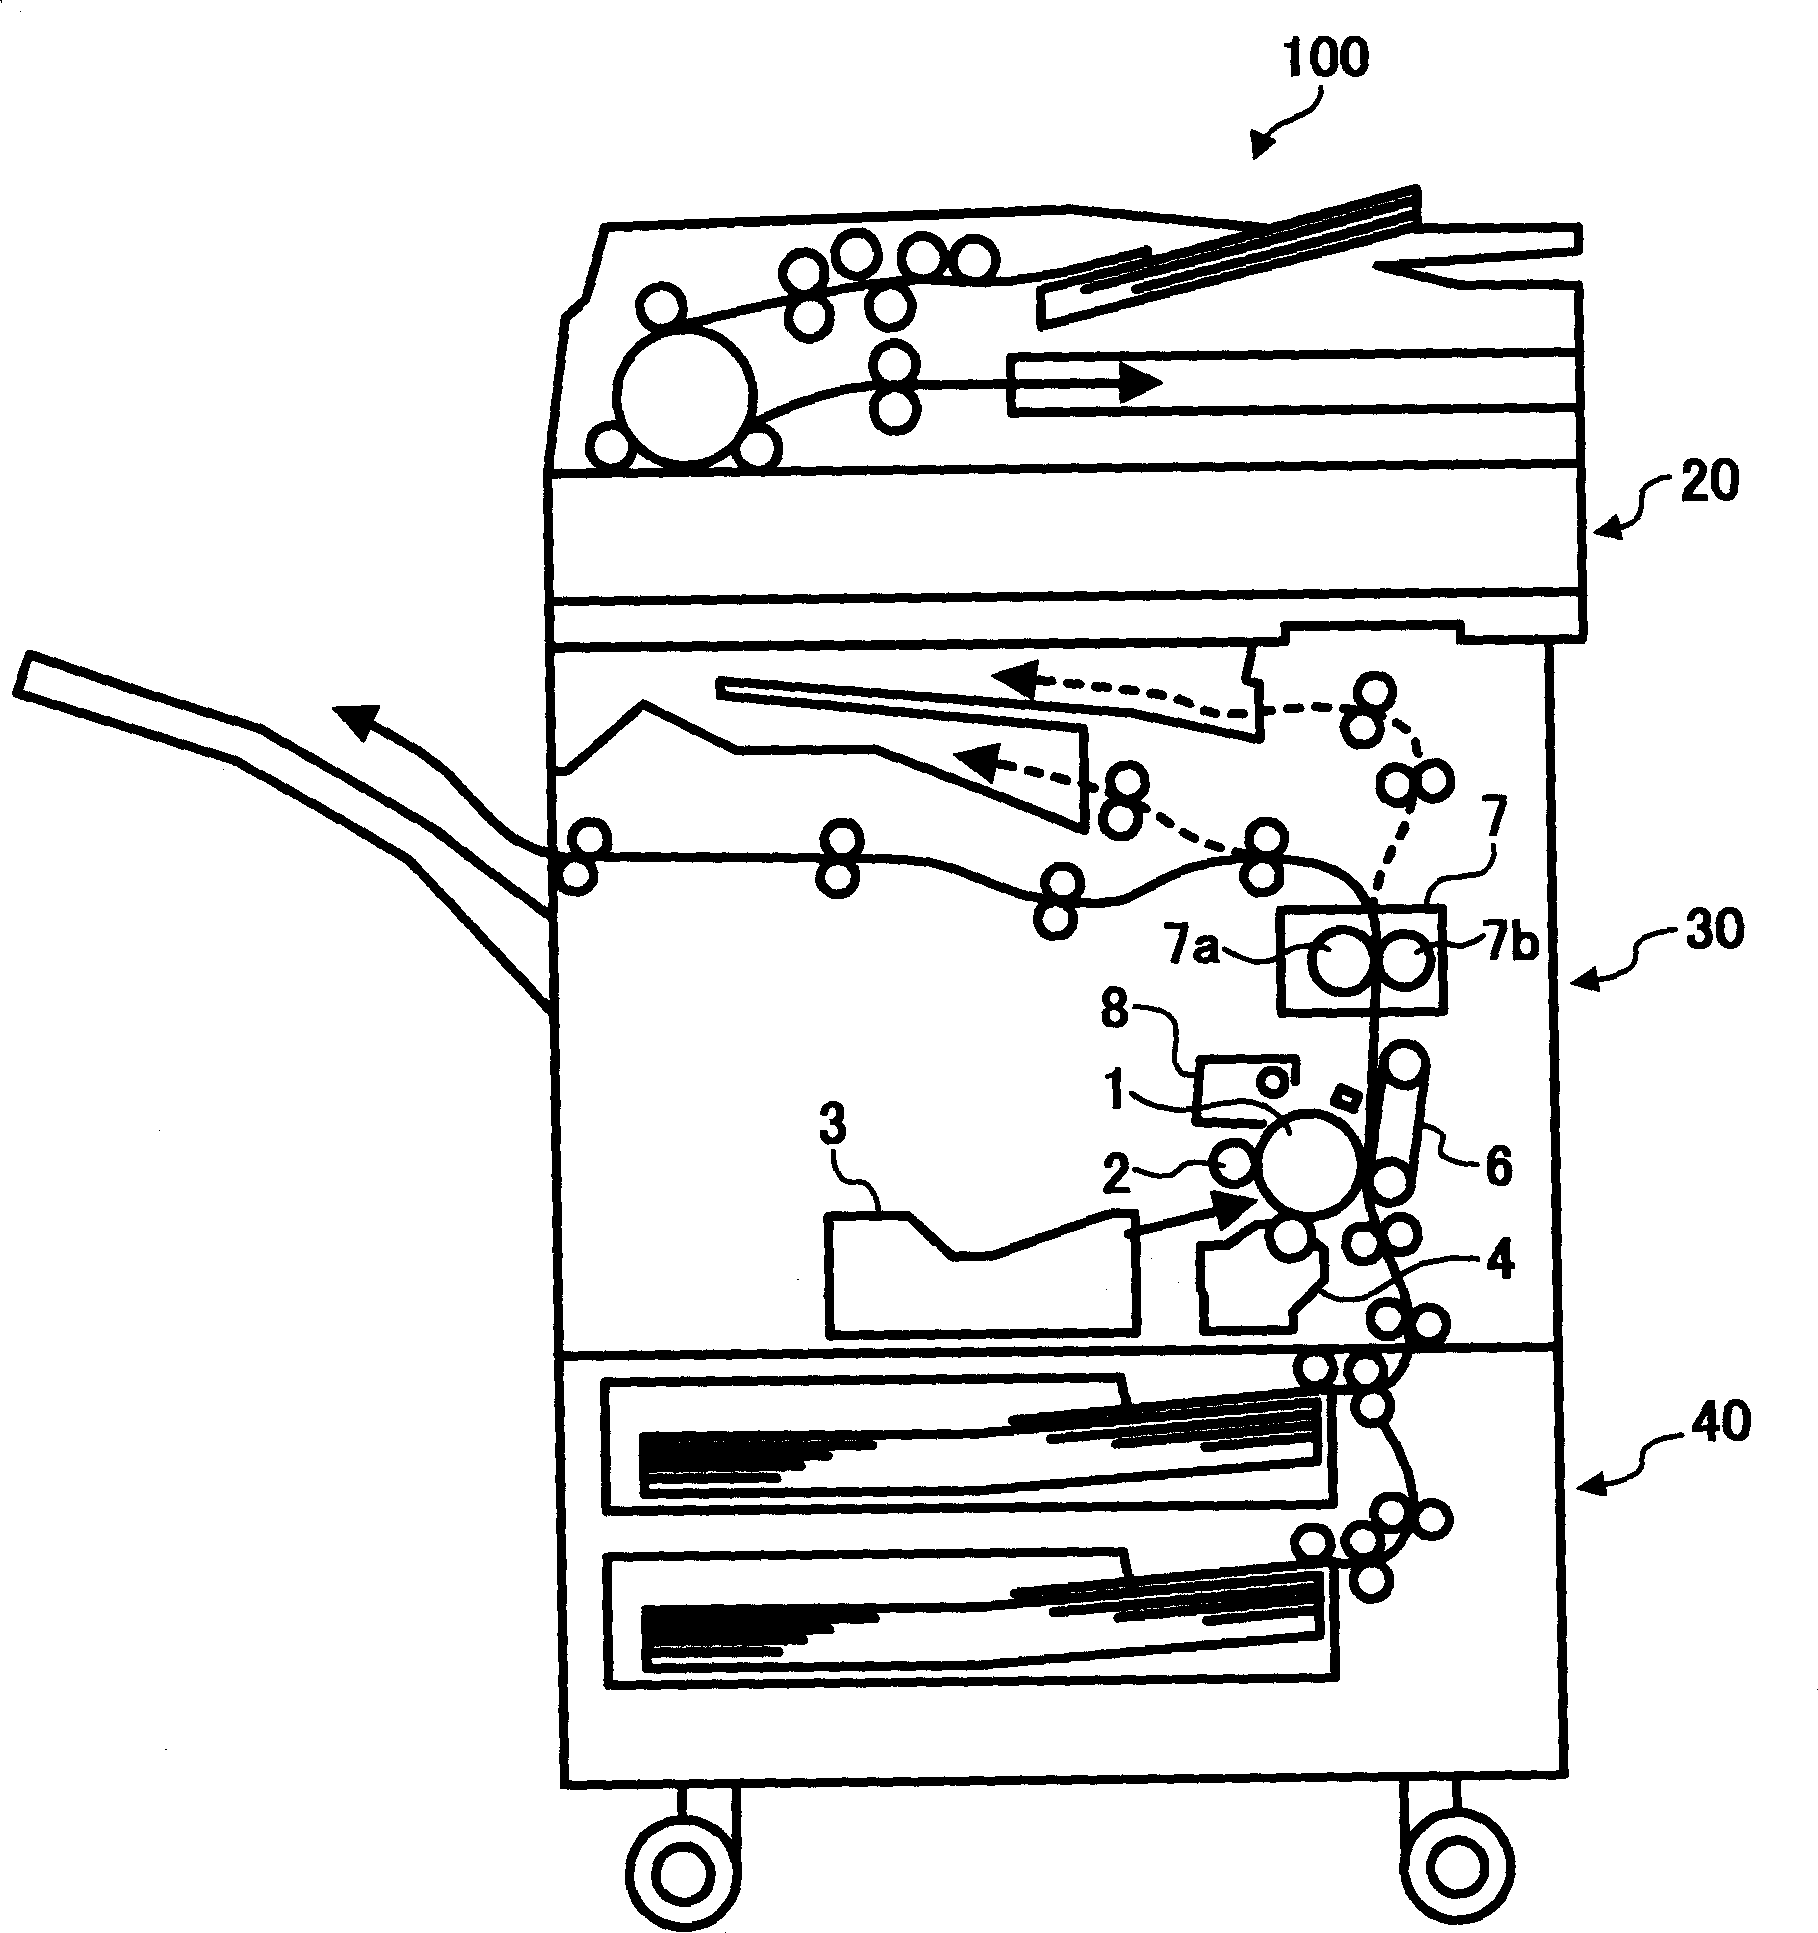 Image forming apparatus for preventing image deterioration caused by fallen conductive brush and scatter of developer